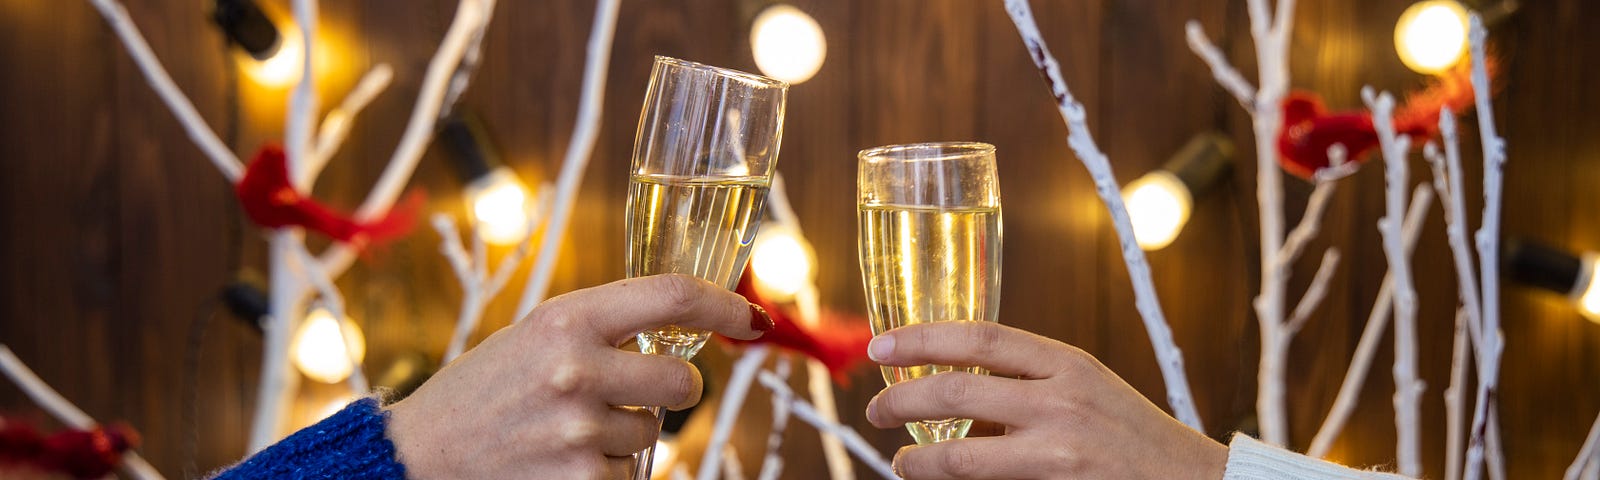 This photos shows two hands clinking to glasses of champagne in a toast.